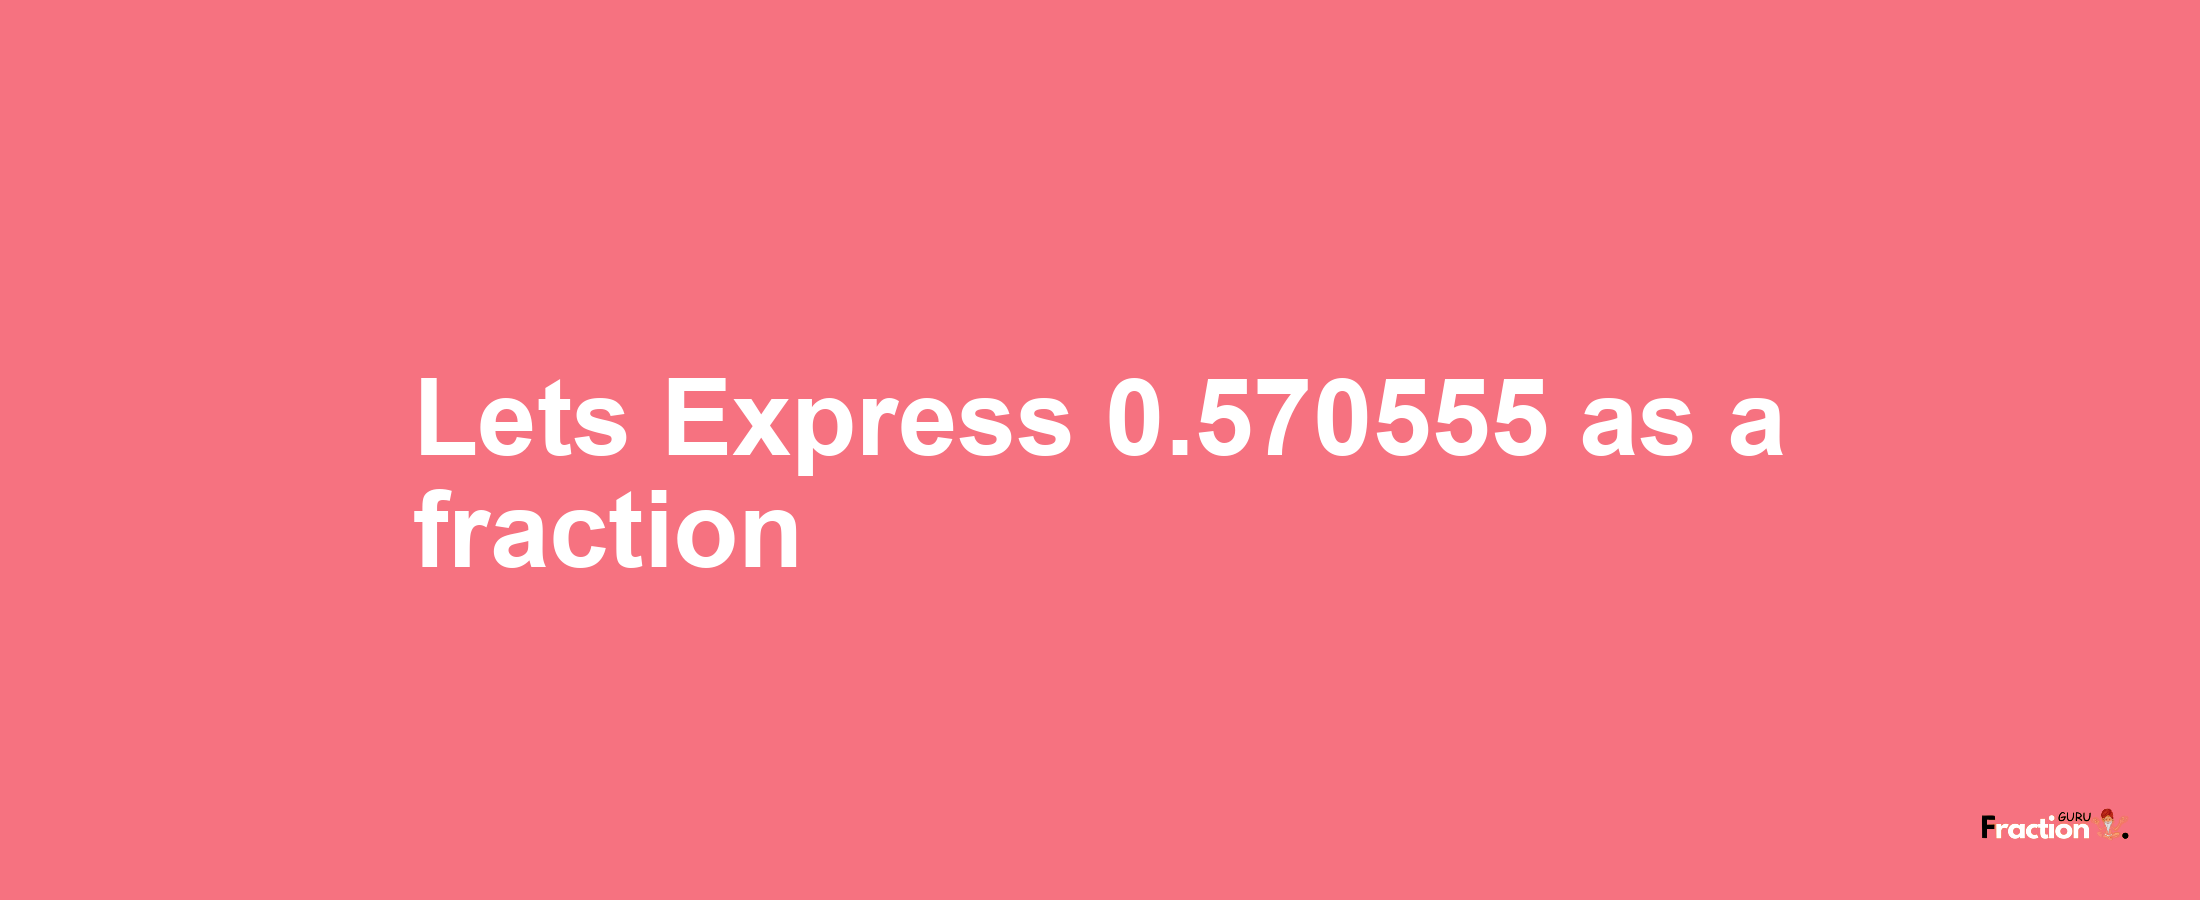 Lets Express 0.570555 as afraction